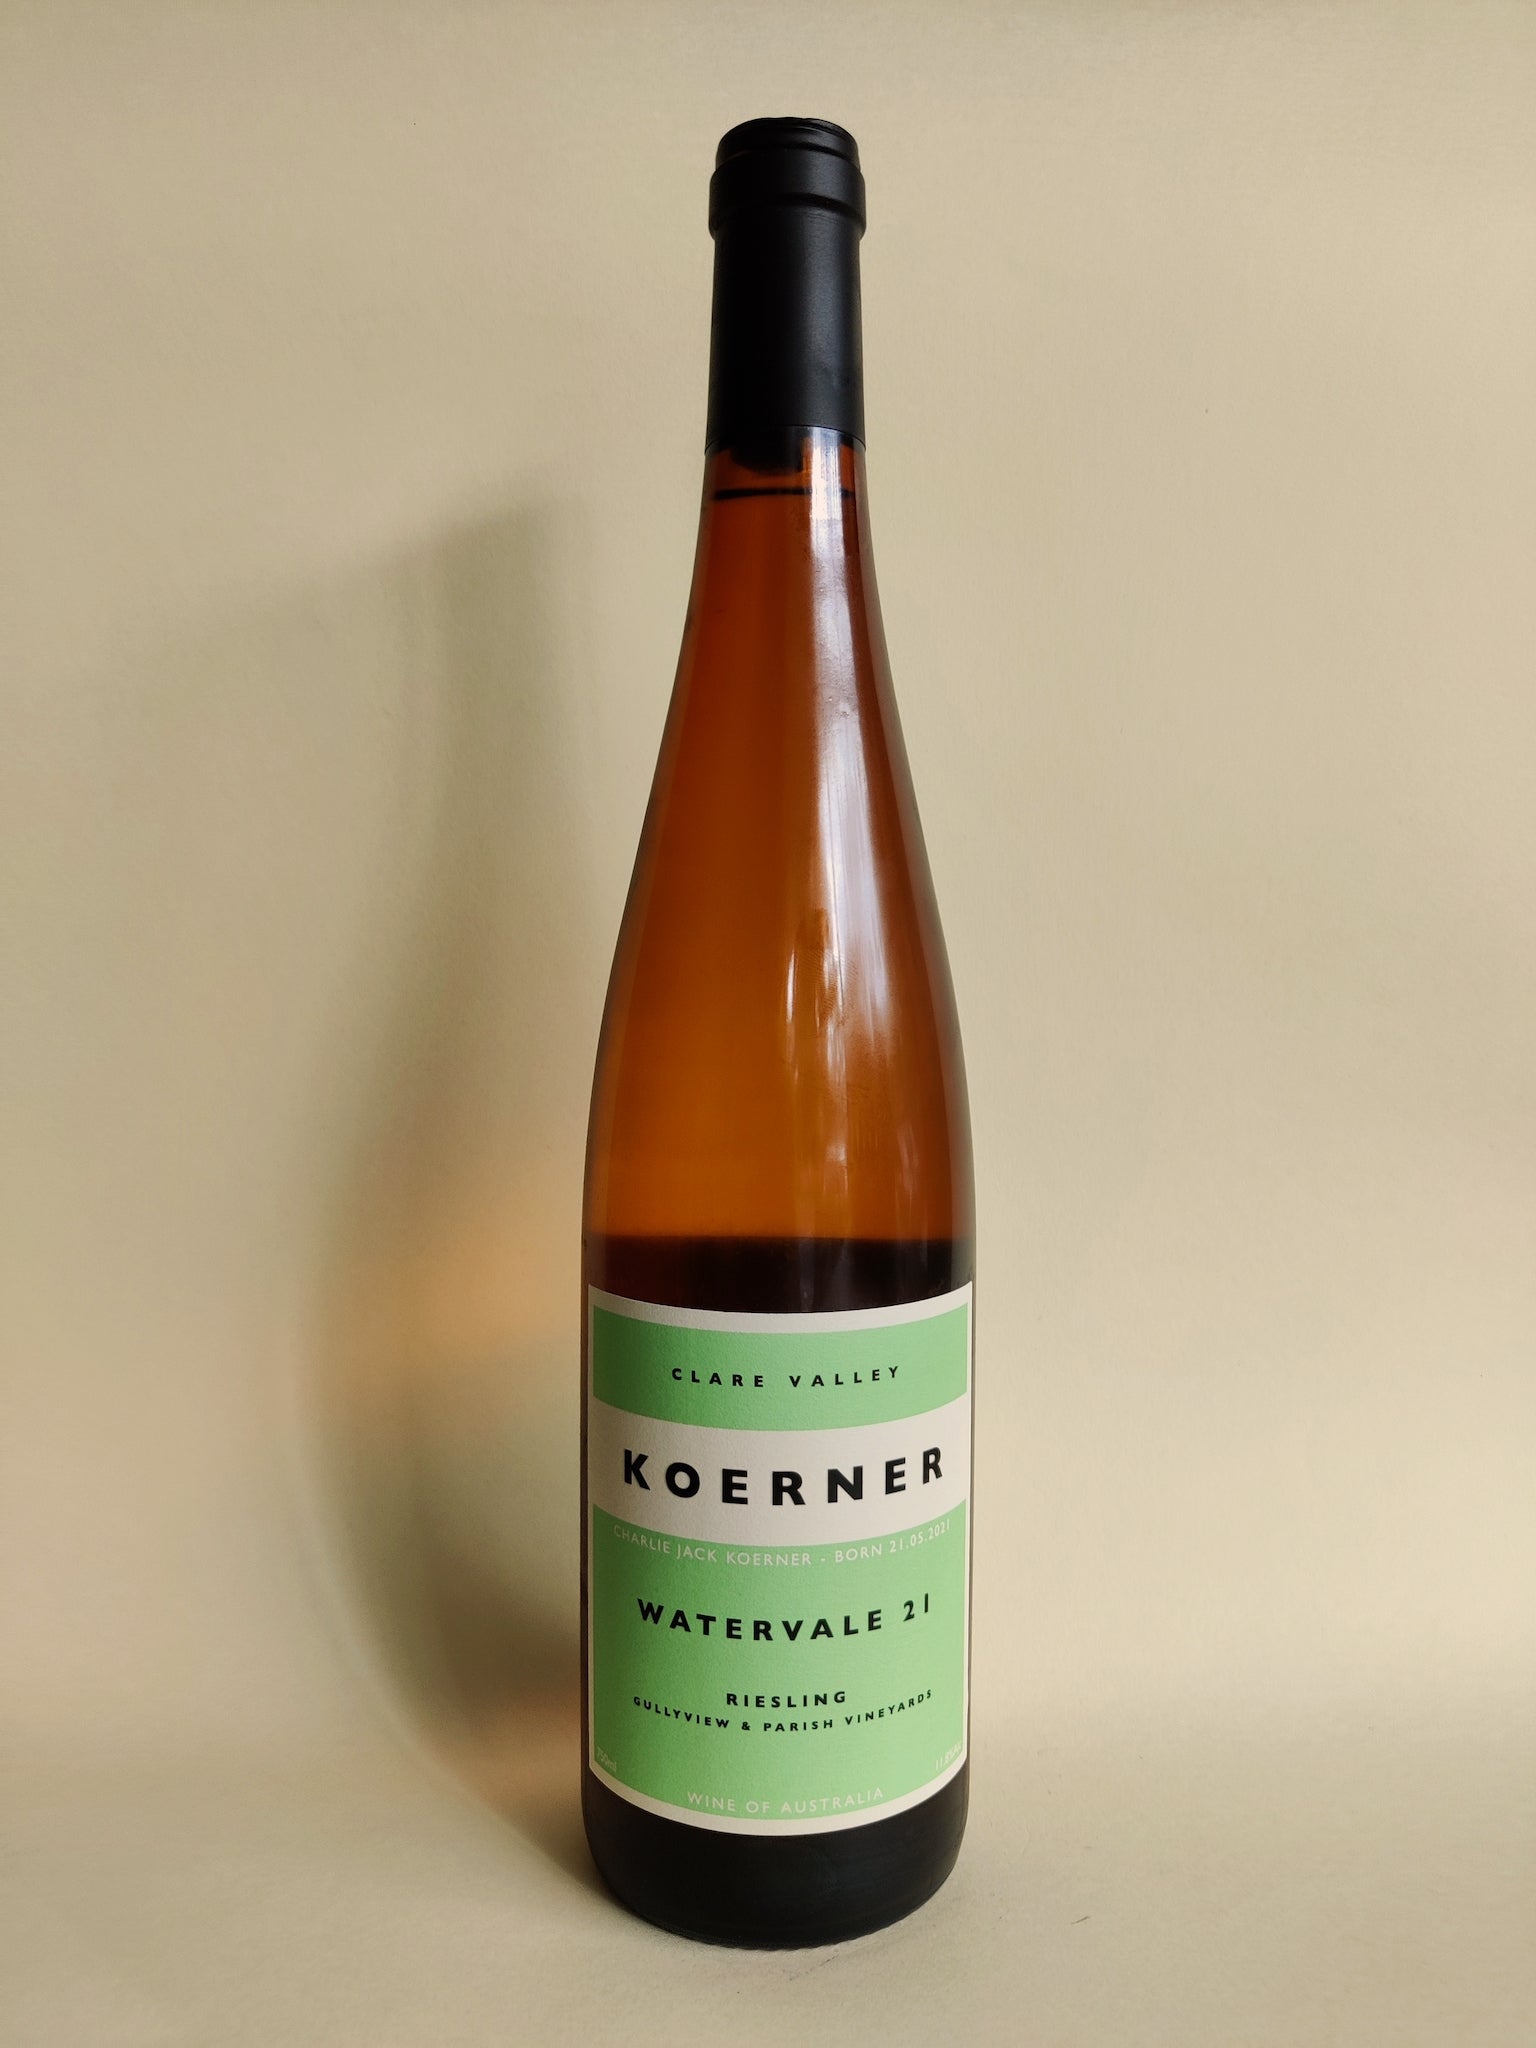 A bottle of Koerner Watervale Riesling from Clare Valley, South Australia. 